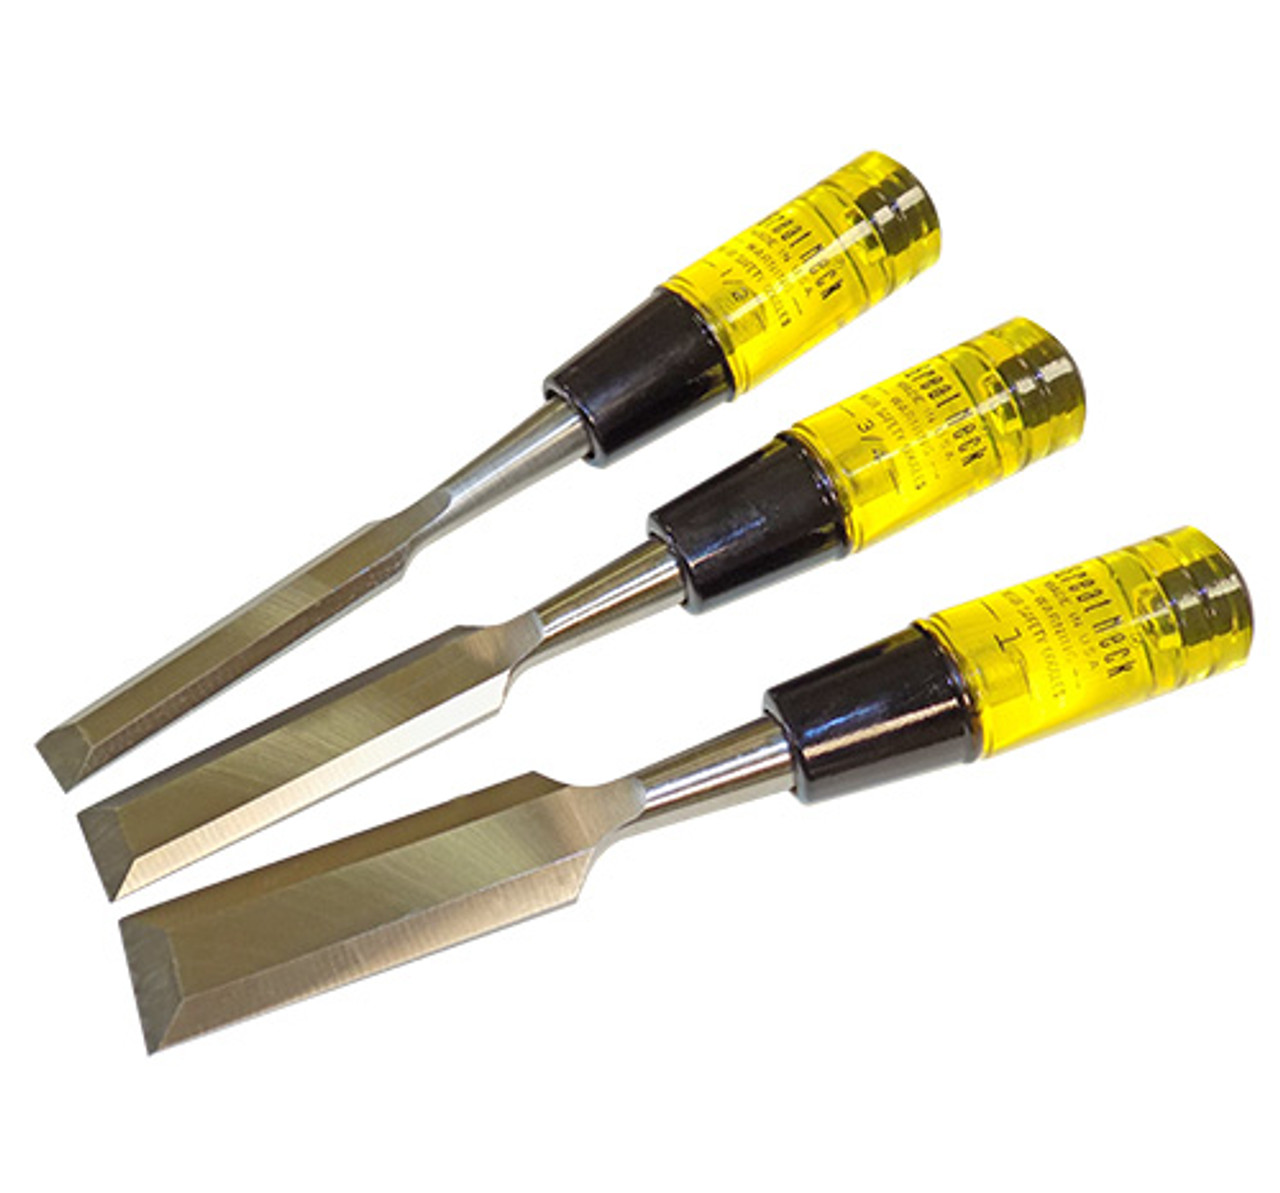 Great woodworking chisels